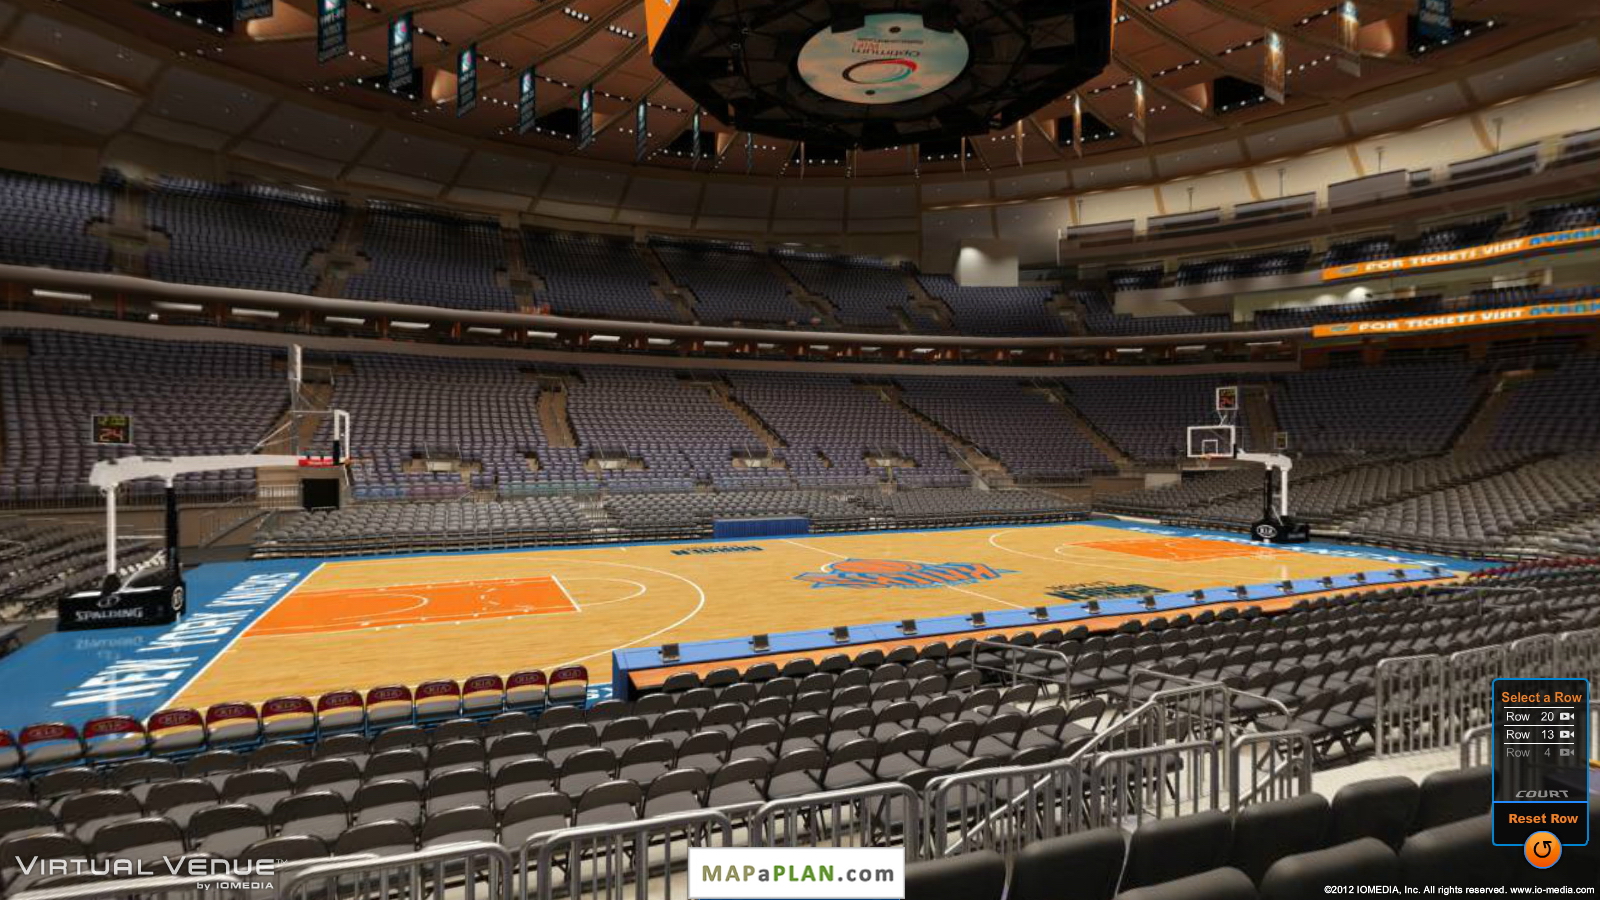 Madison square garden seating chart View from section 106